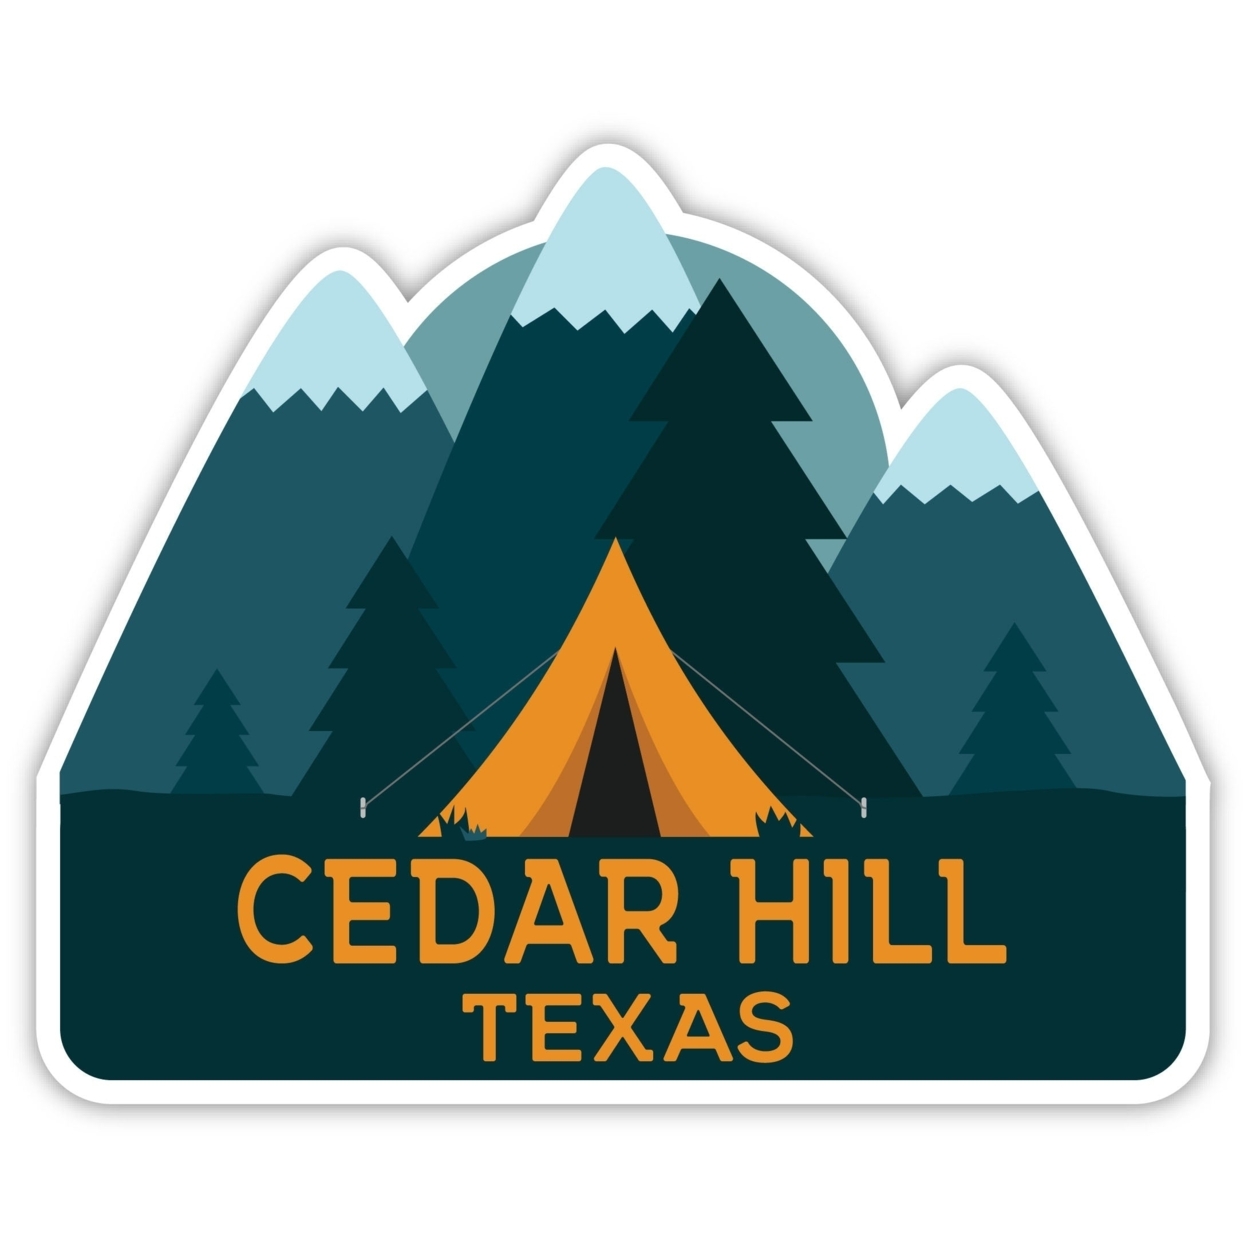 Cedar Hill Texas Souvenir Decorative Stickers (Choose Theme And Size) - 4-Pack, 8-Inch, Tent